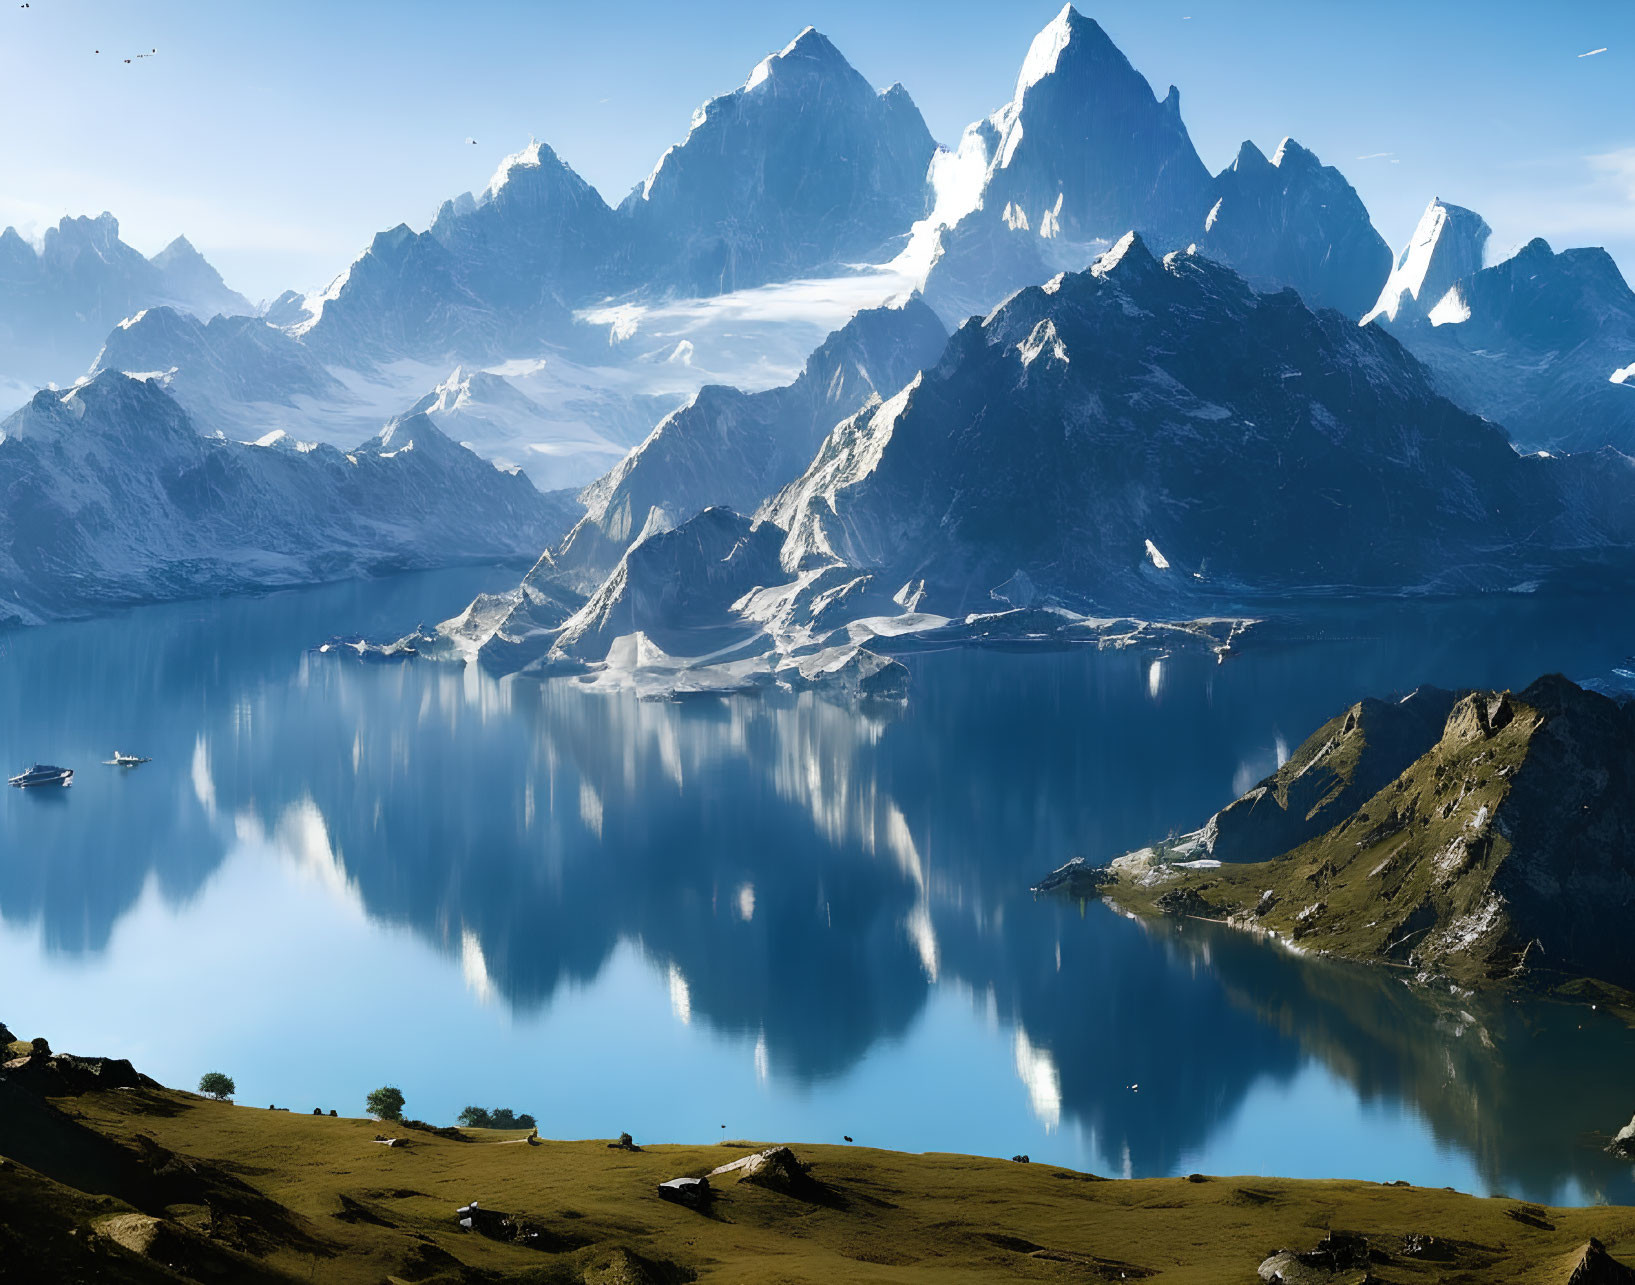 Snow-capped peaks and serene lake with reflective waters